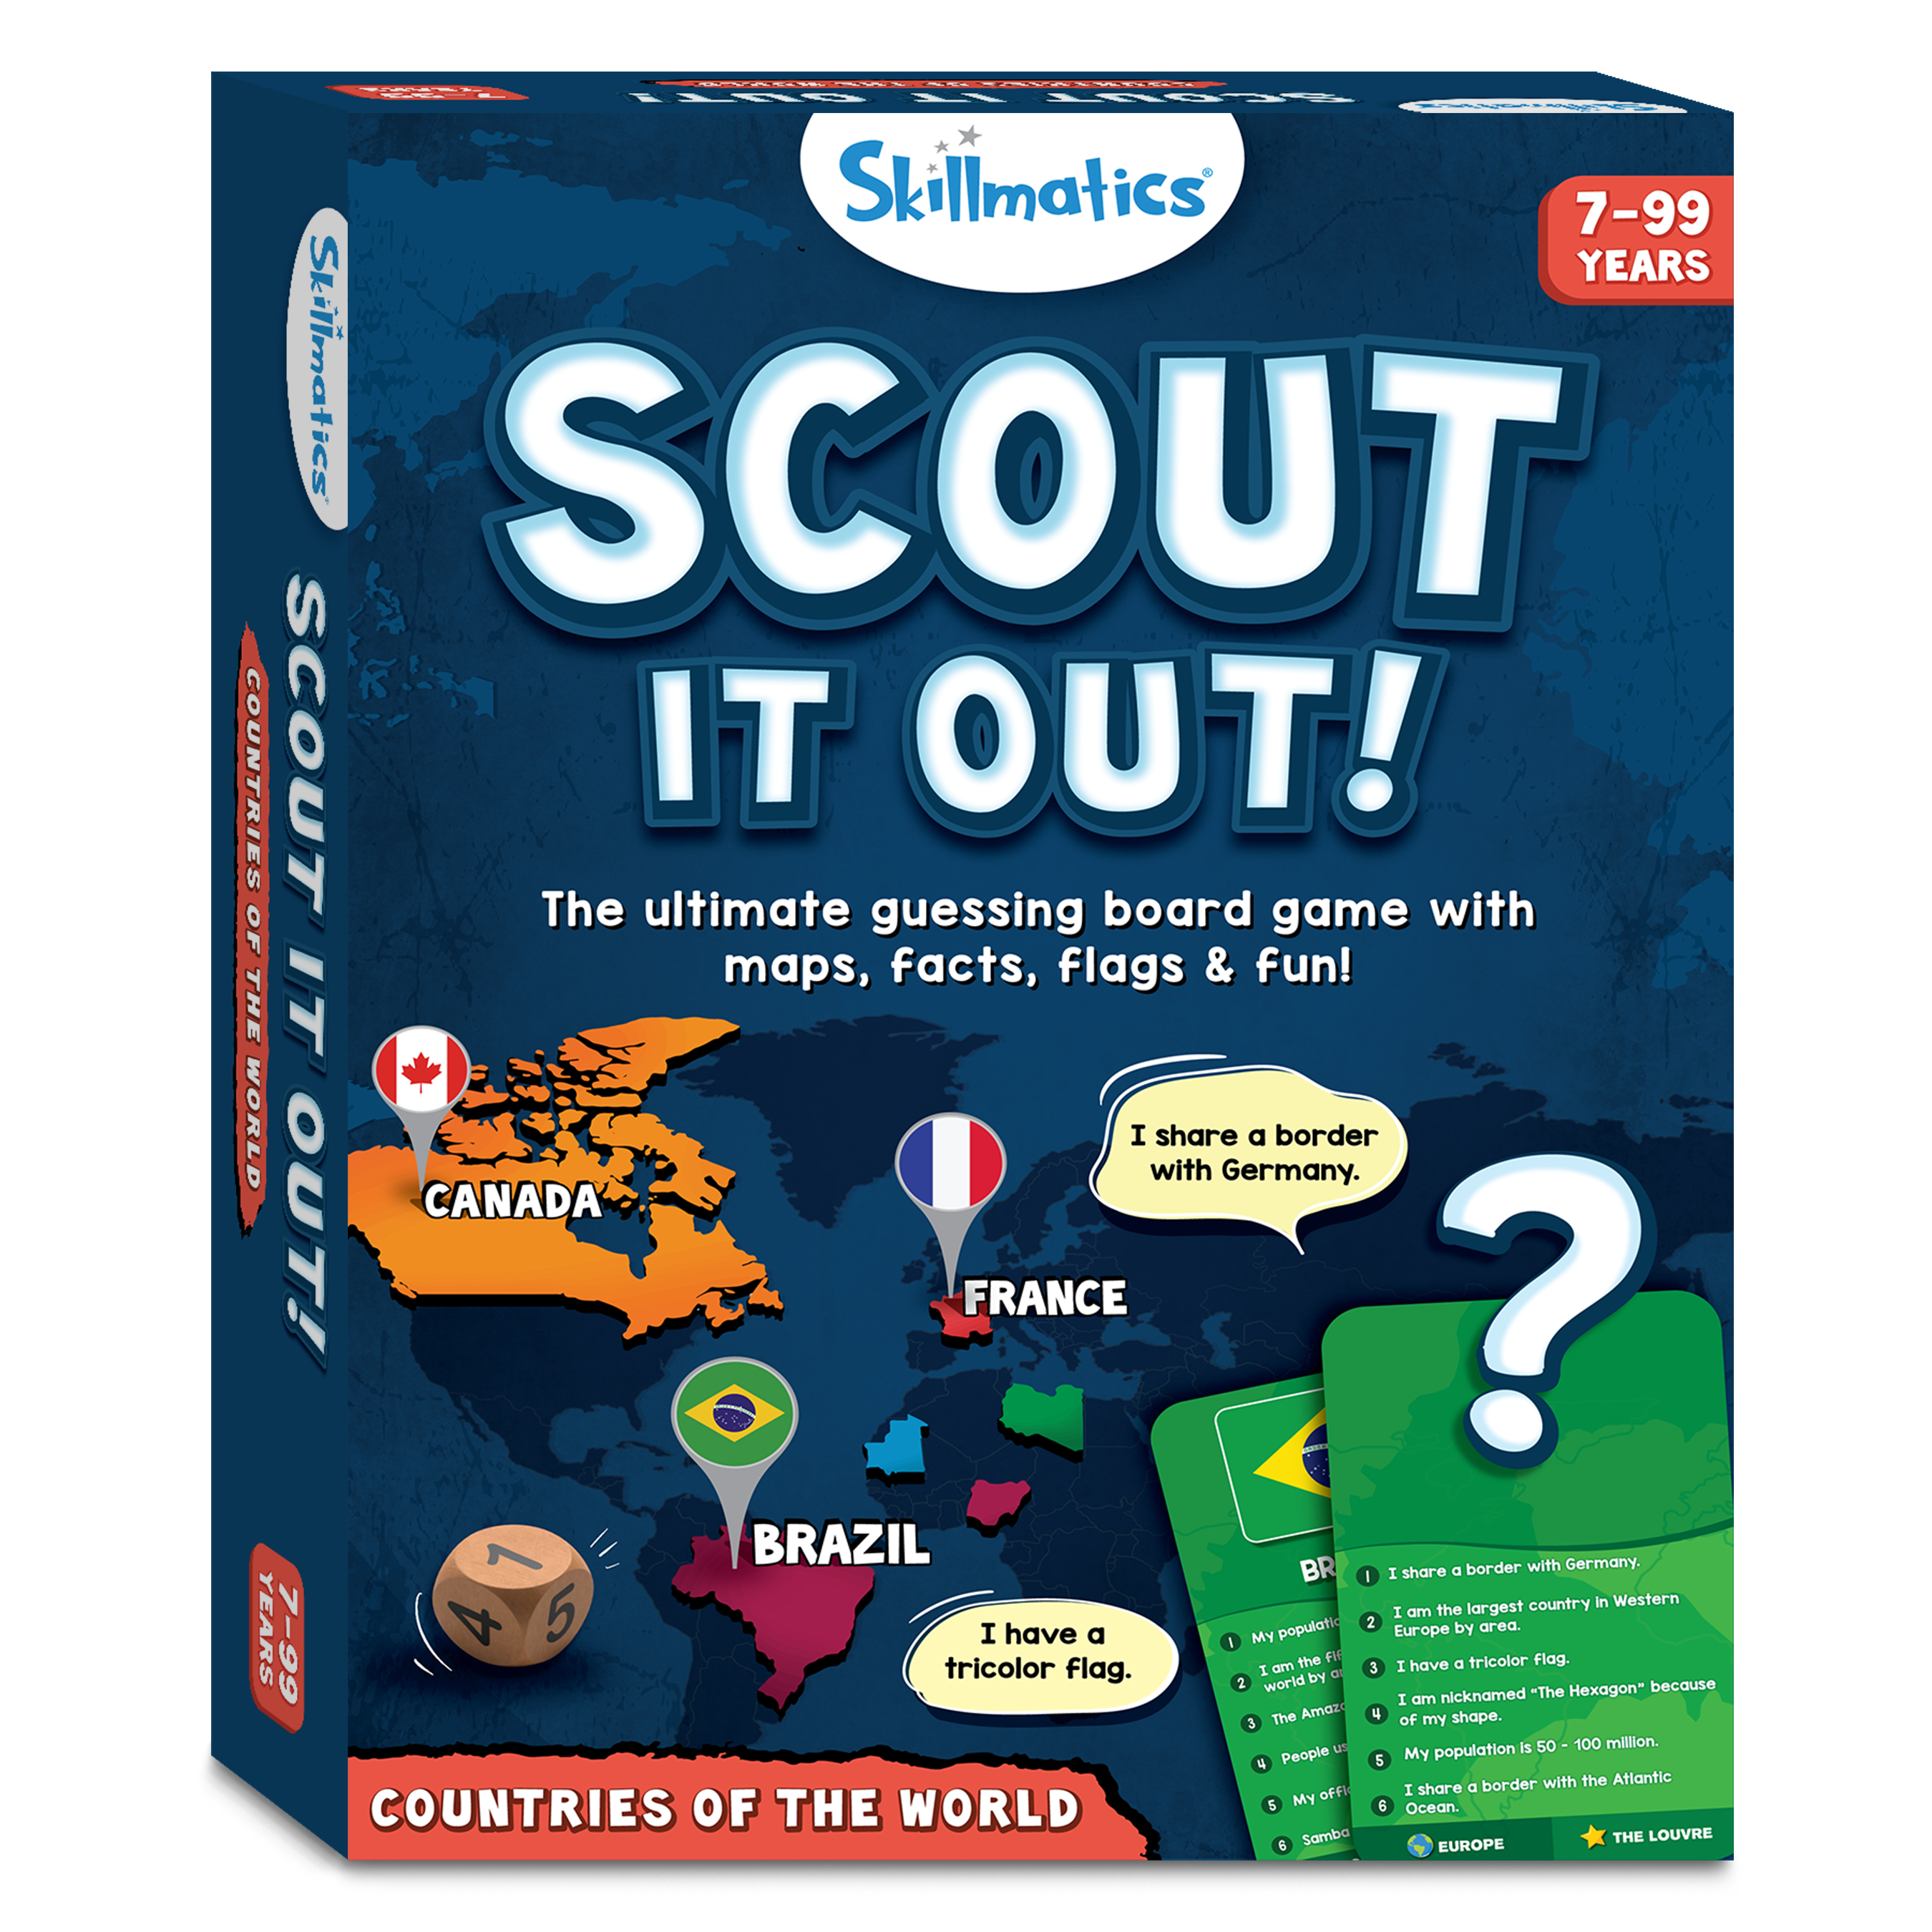 Skillmatics Board Game - Scout It Out Countries of the World, Fun Guessing & Trivia Game for Families, Ages 7 and Up